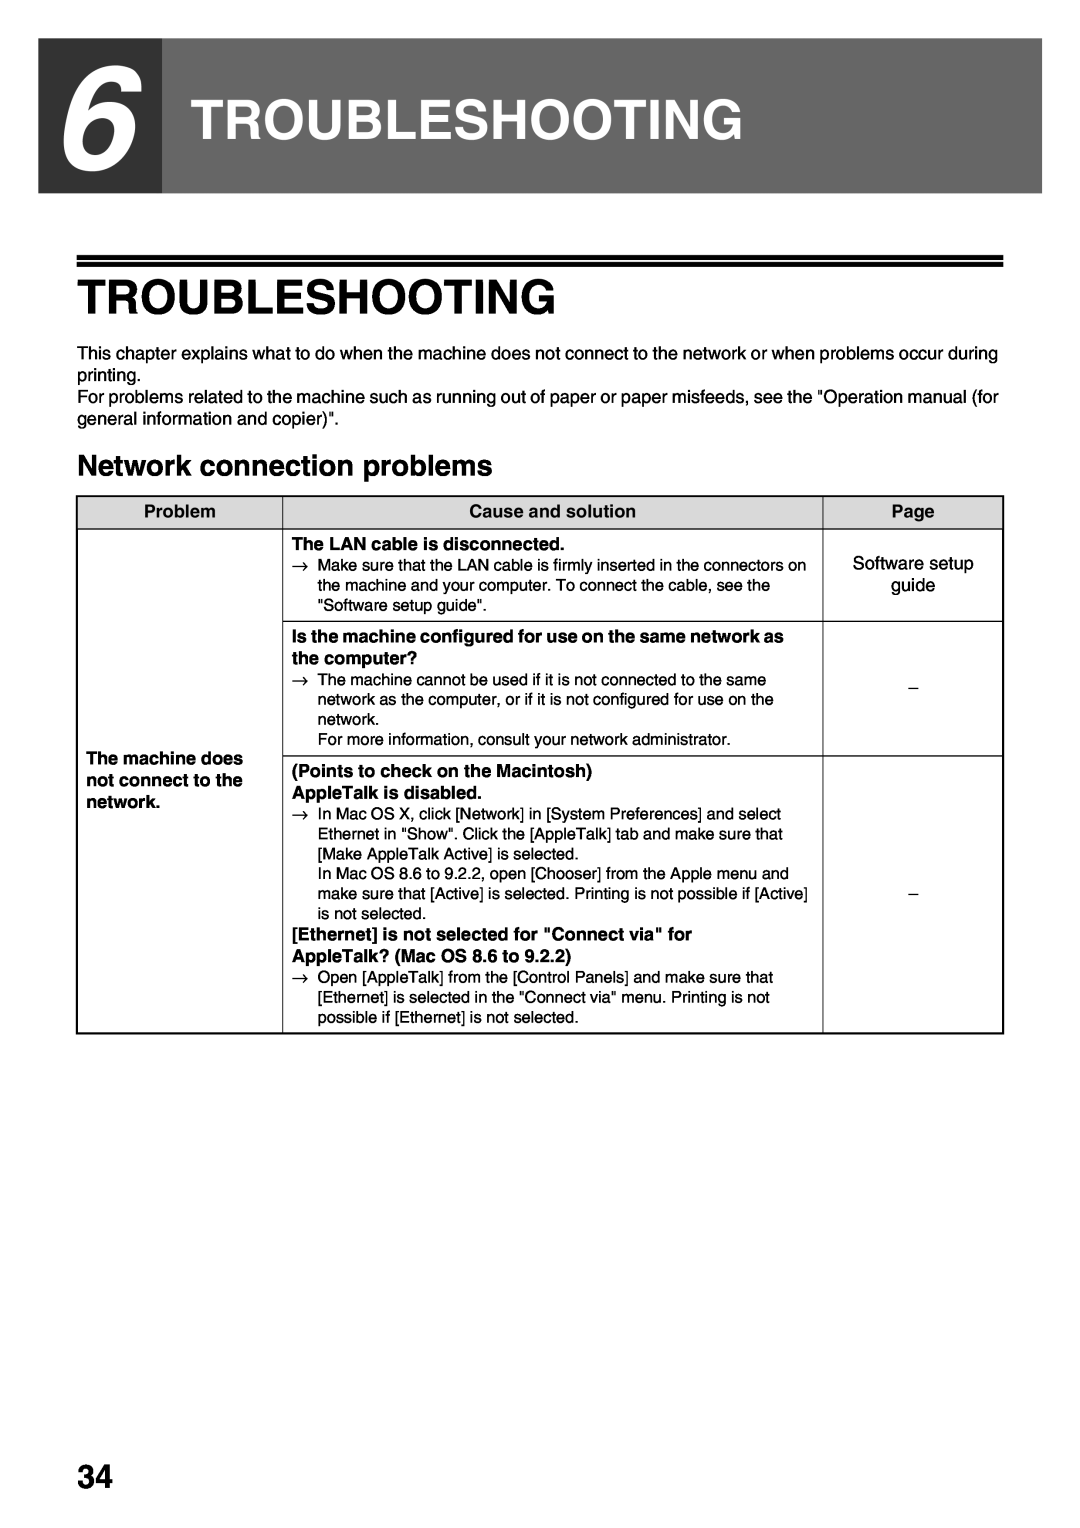 Sharp AR-NB3 operation manual Troubleshooting, Network connection problems 